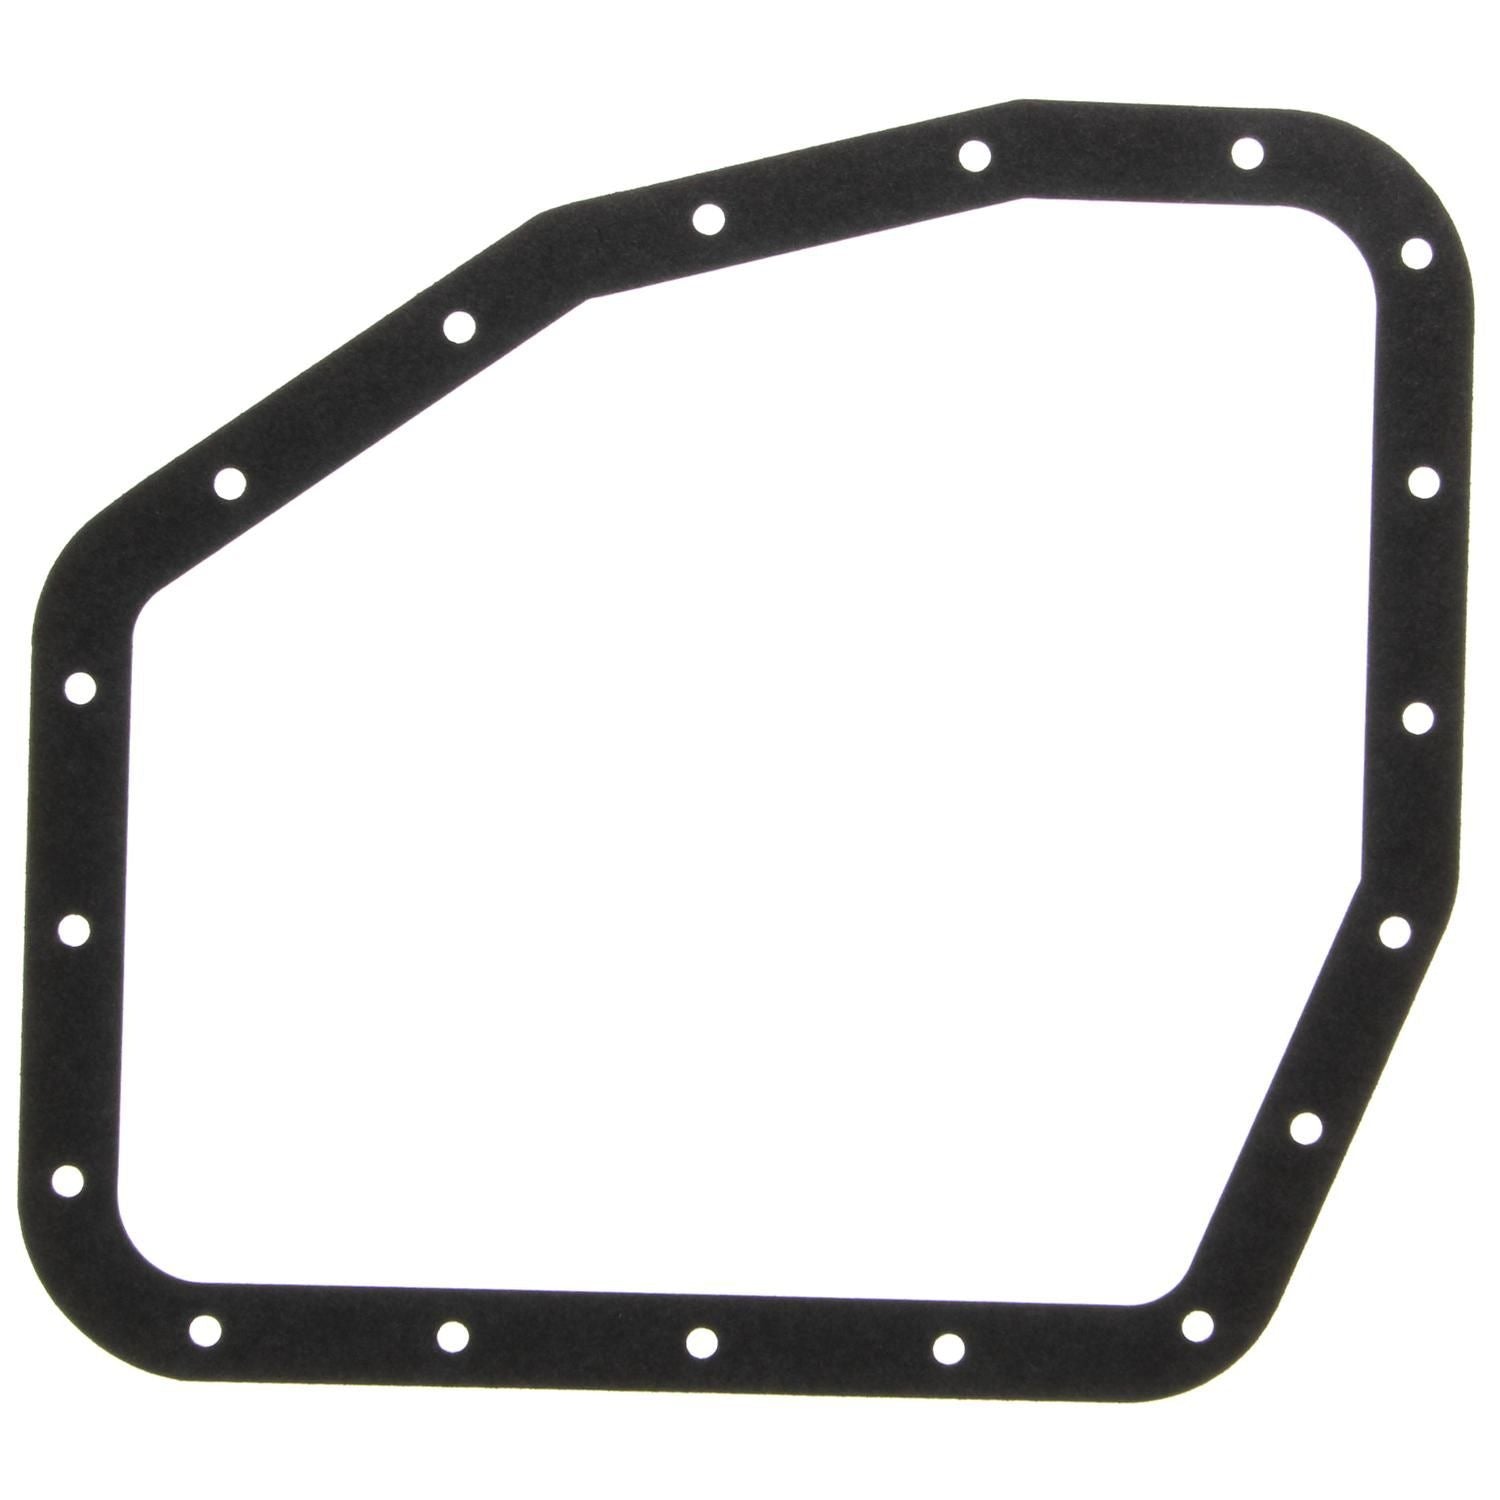 MAHLE Automatic Transmission Oil Pan Gasket W33188